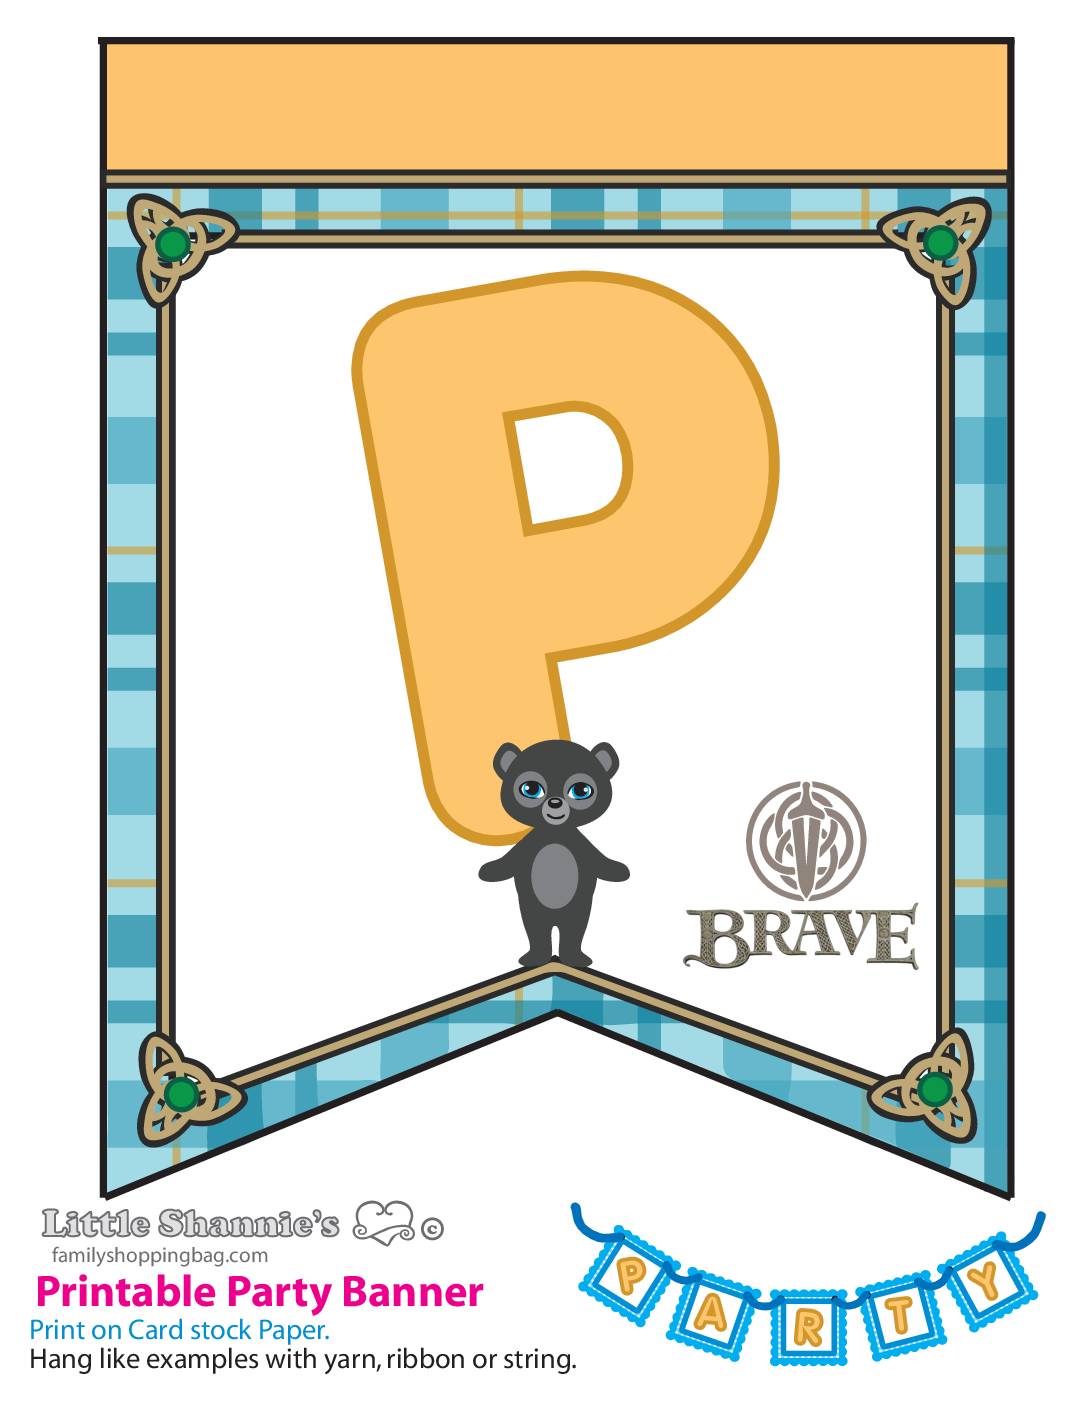 Party Banner p Brave Party Banners